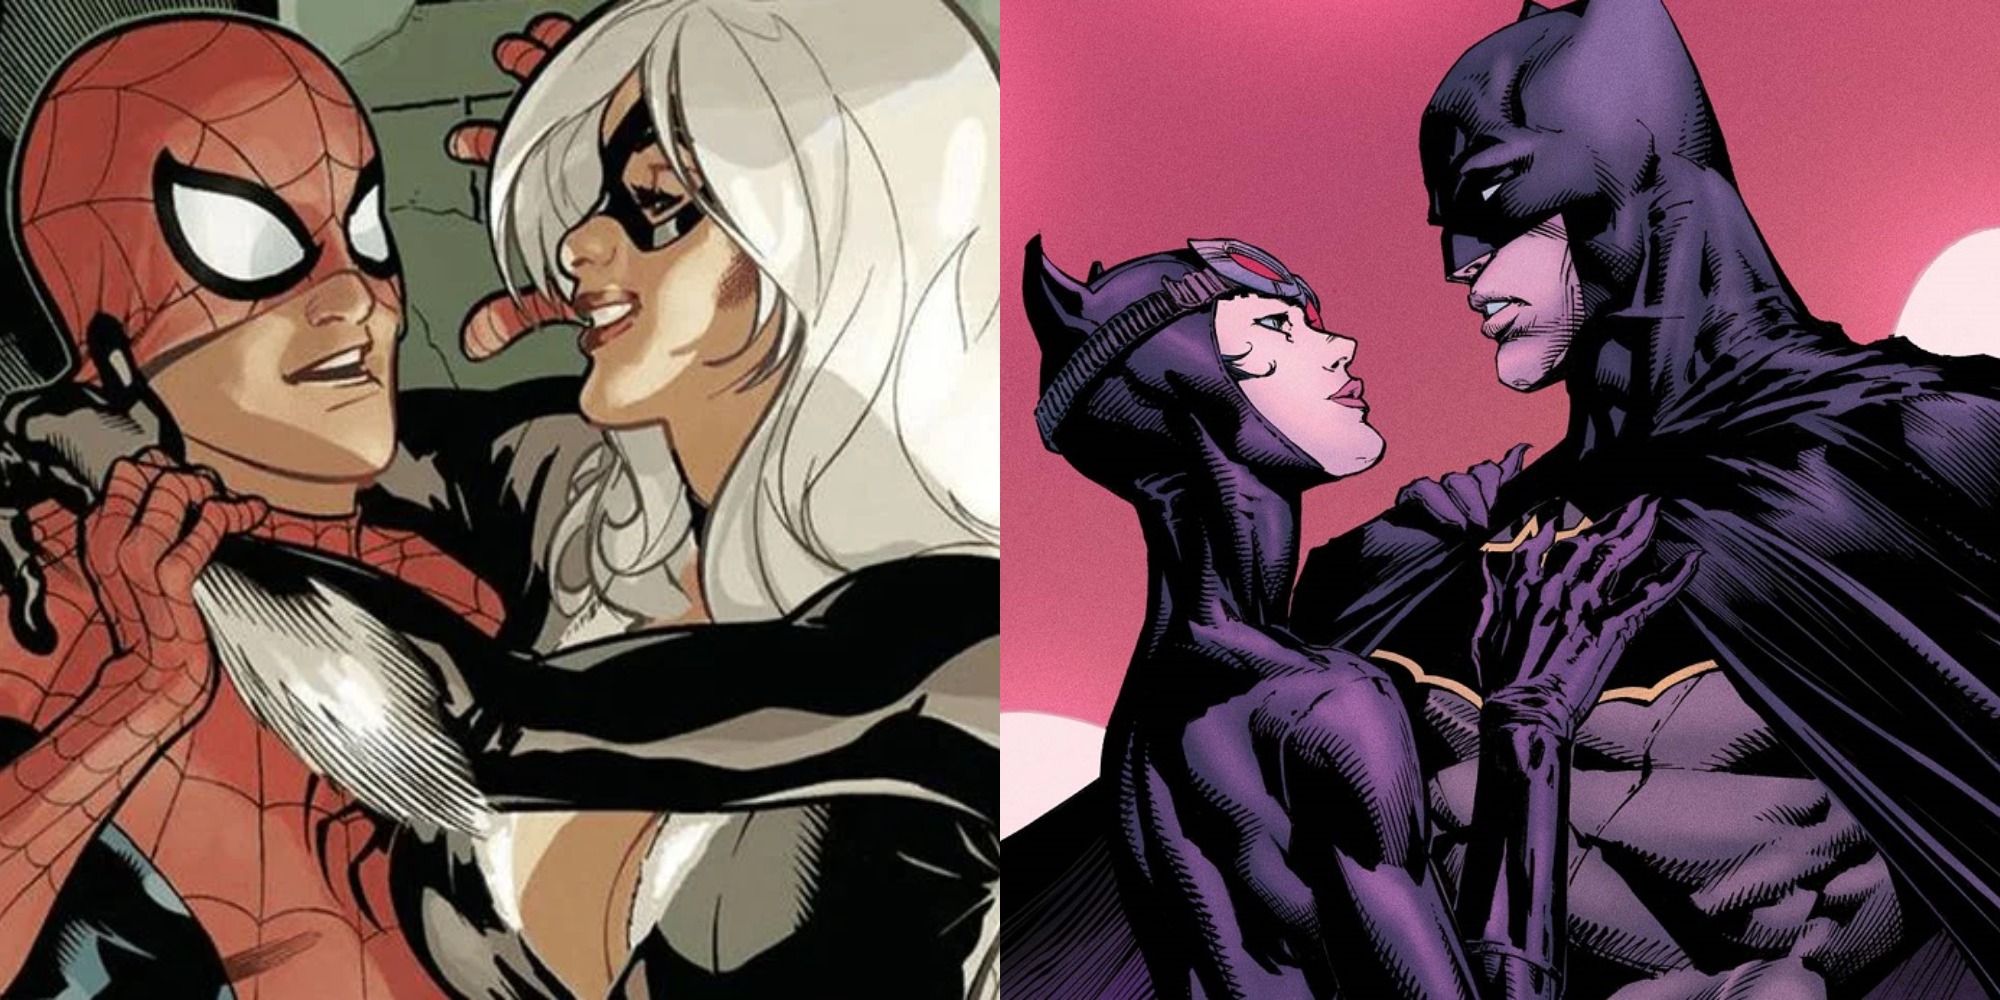 Split image showing Spider-Man and Black Cat and Catwoman and Batman in the comics.